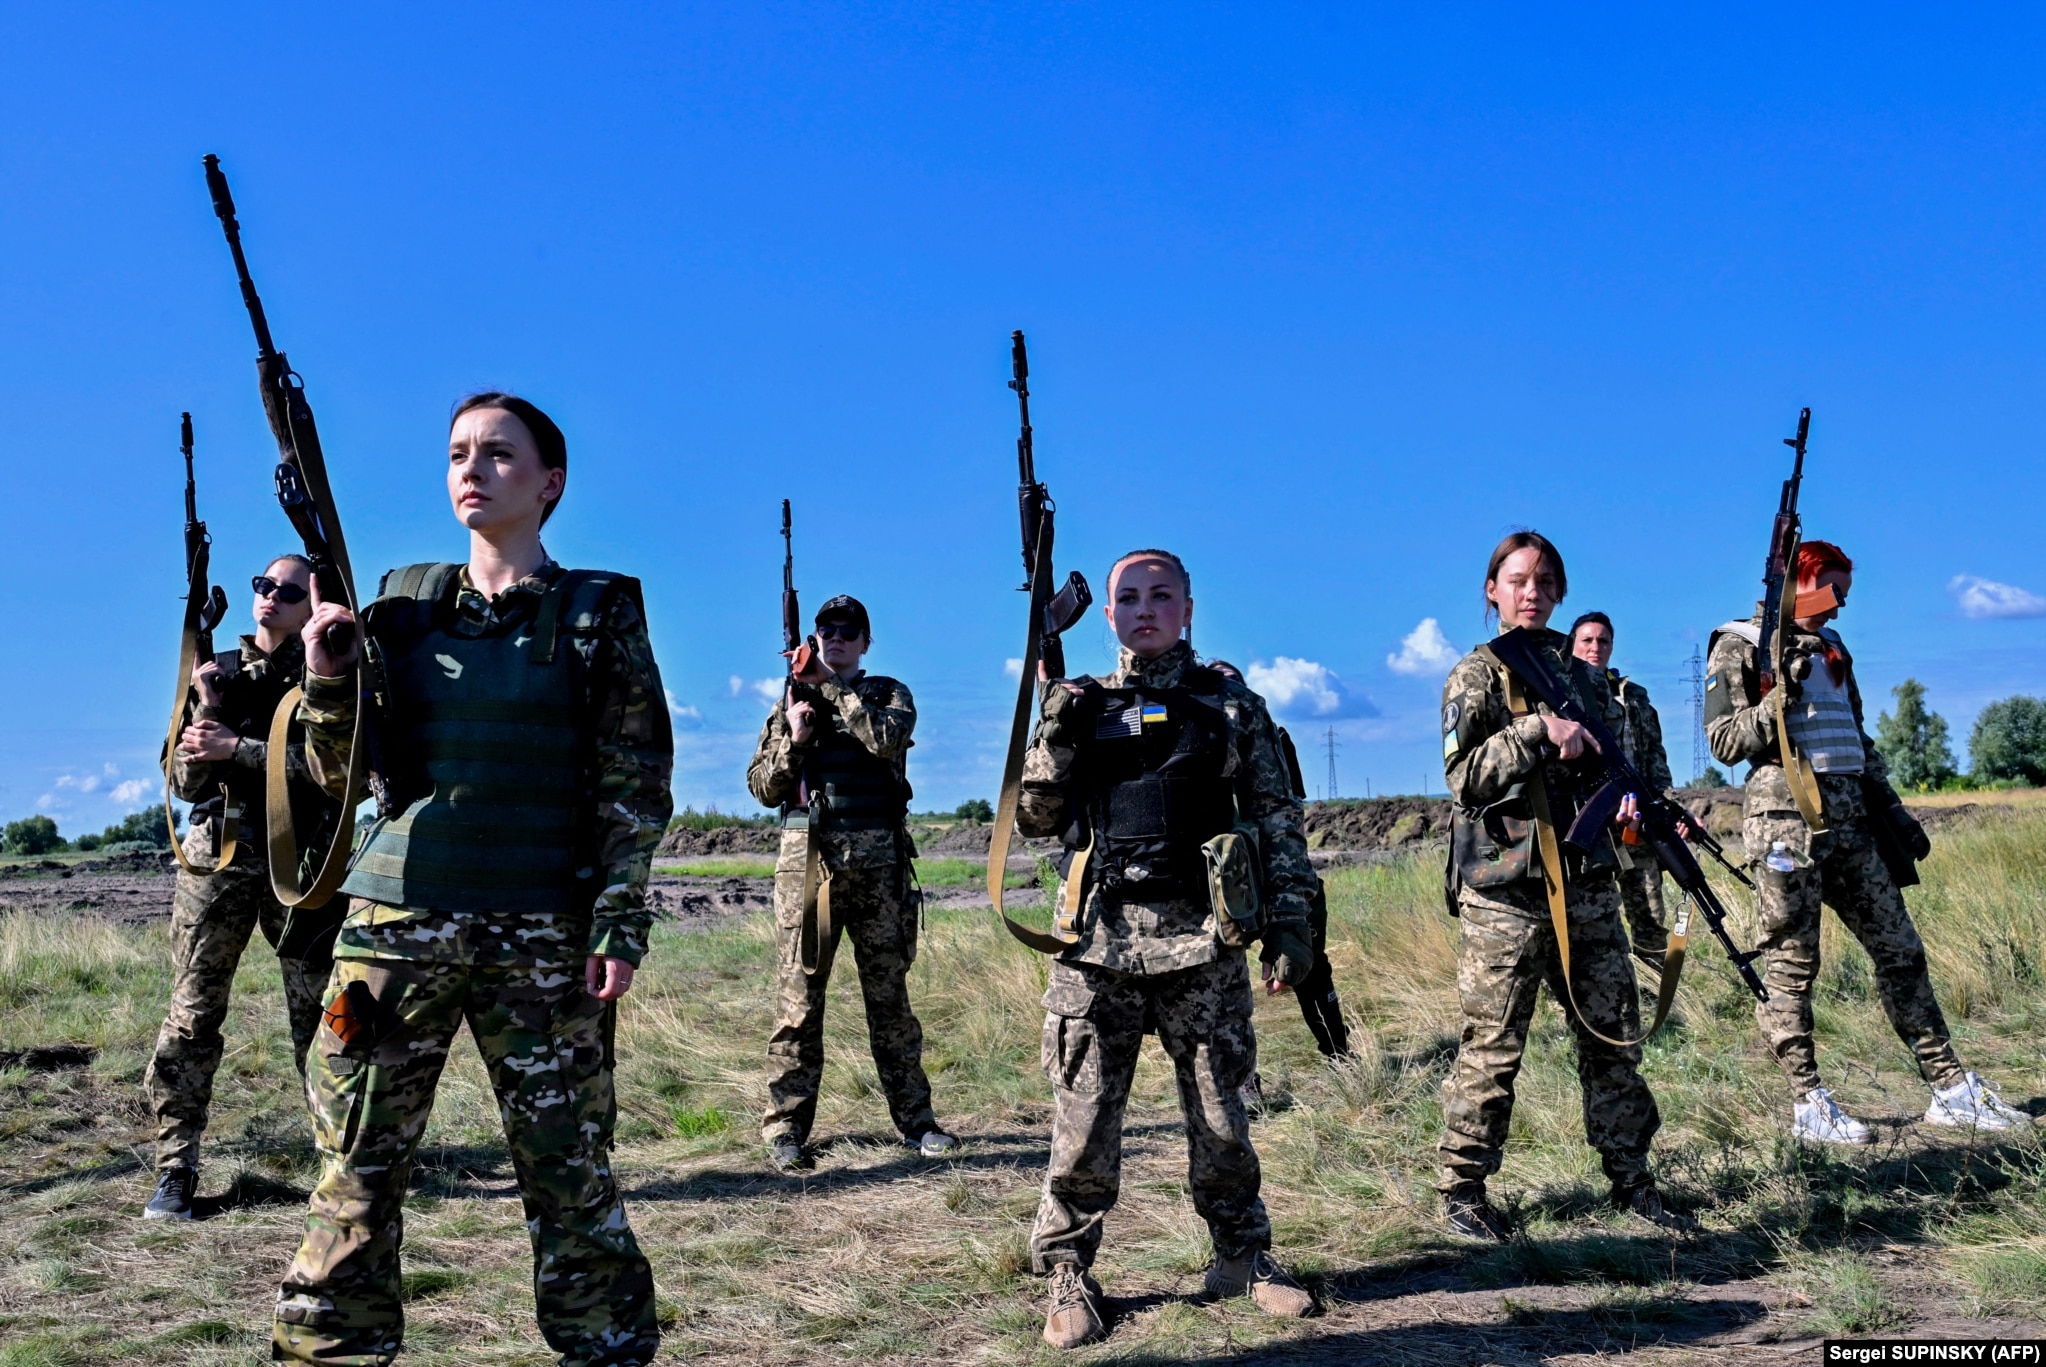 Female Ukrainian cadets wear the new military uniforms designed specially for women.